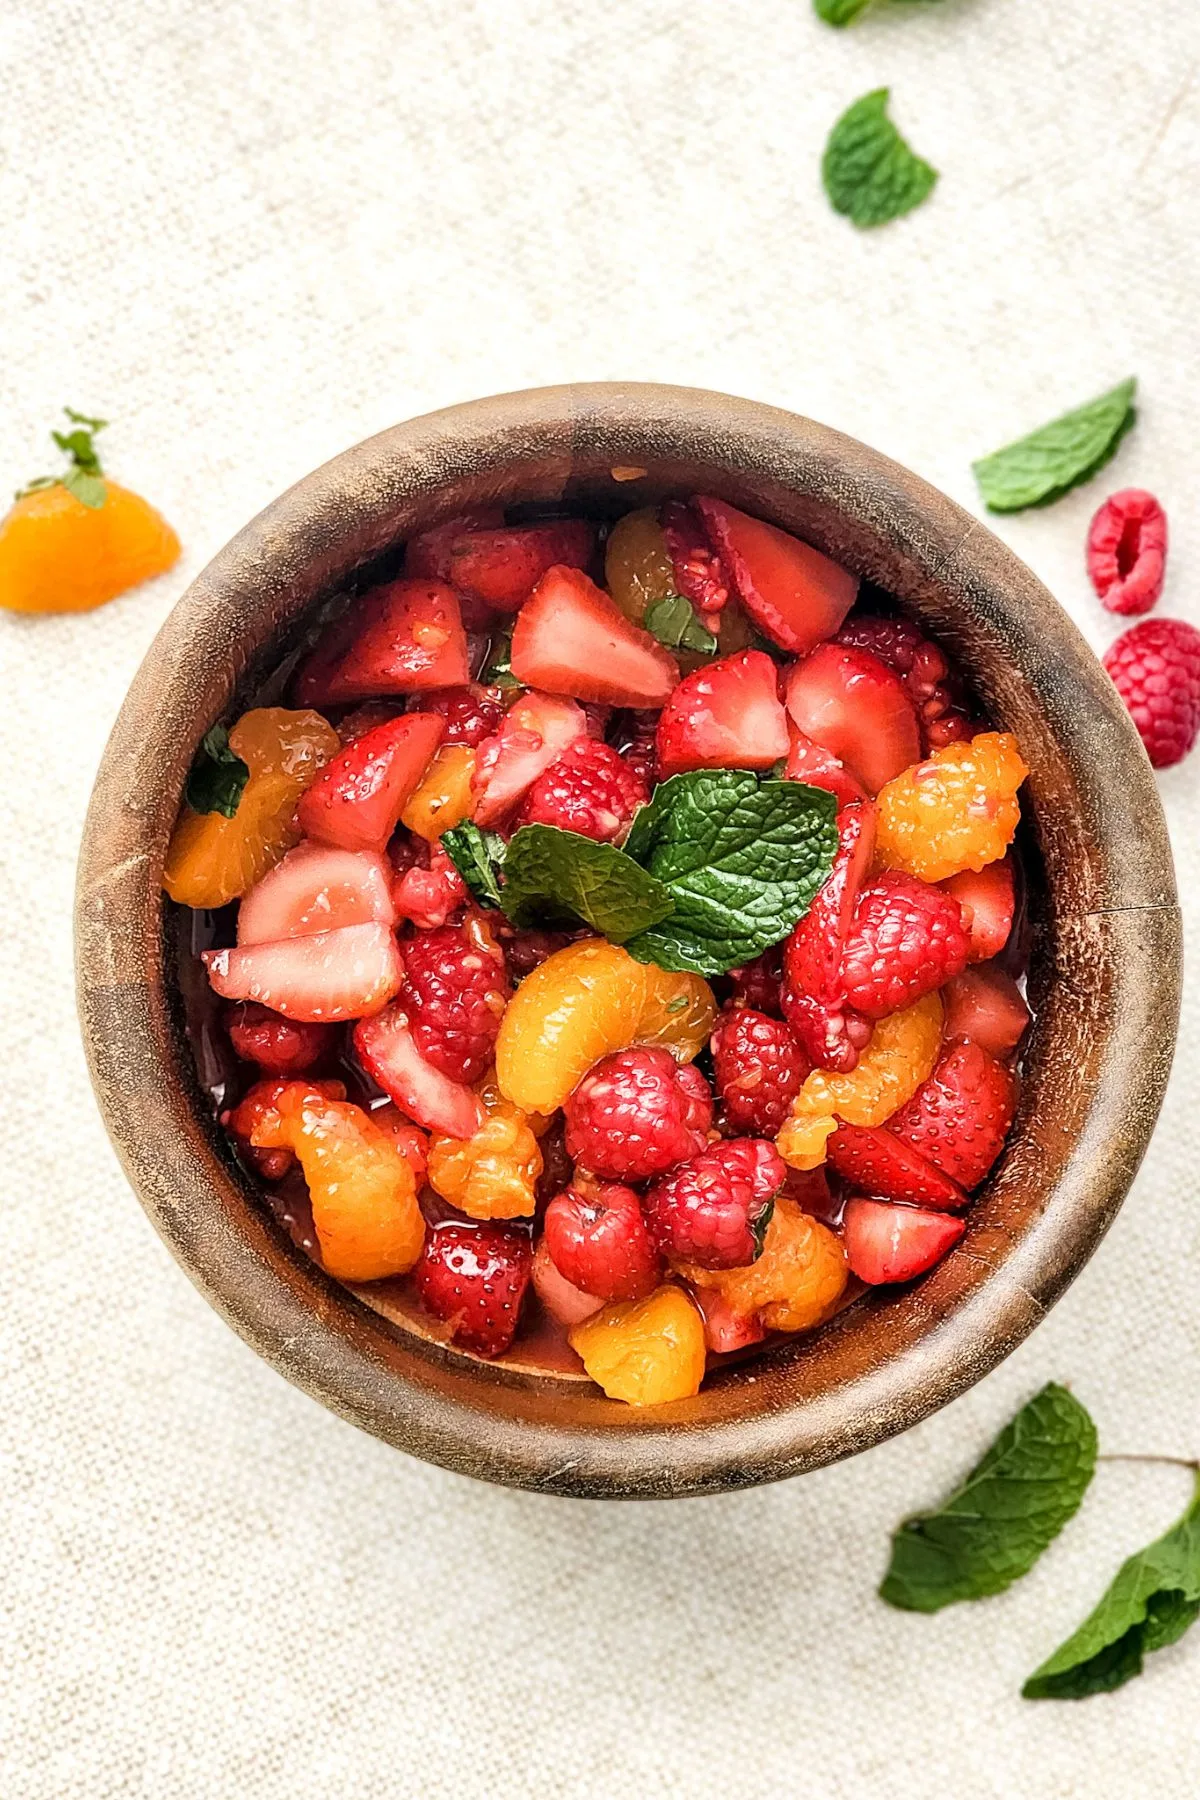 A bowl of mixed berry fruit salad ready to be served.